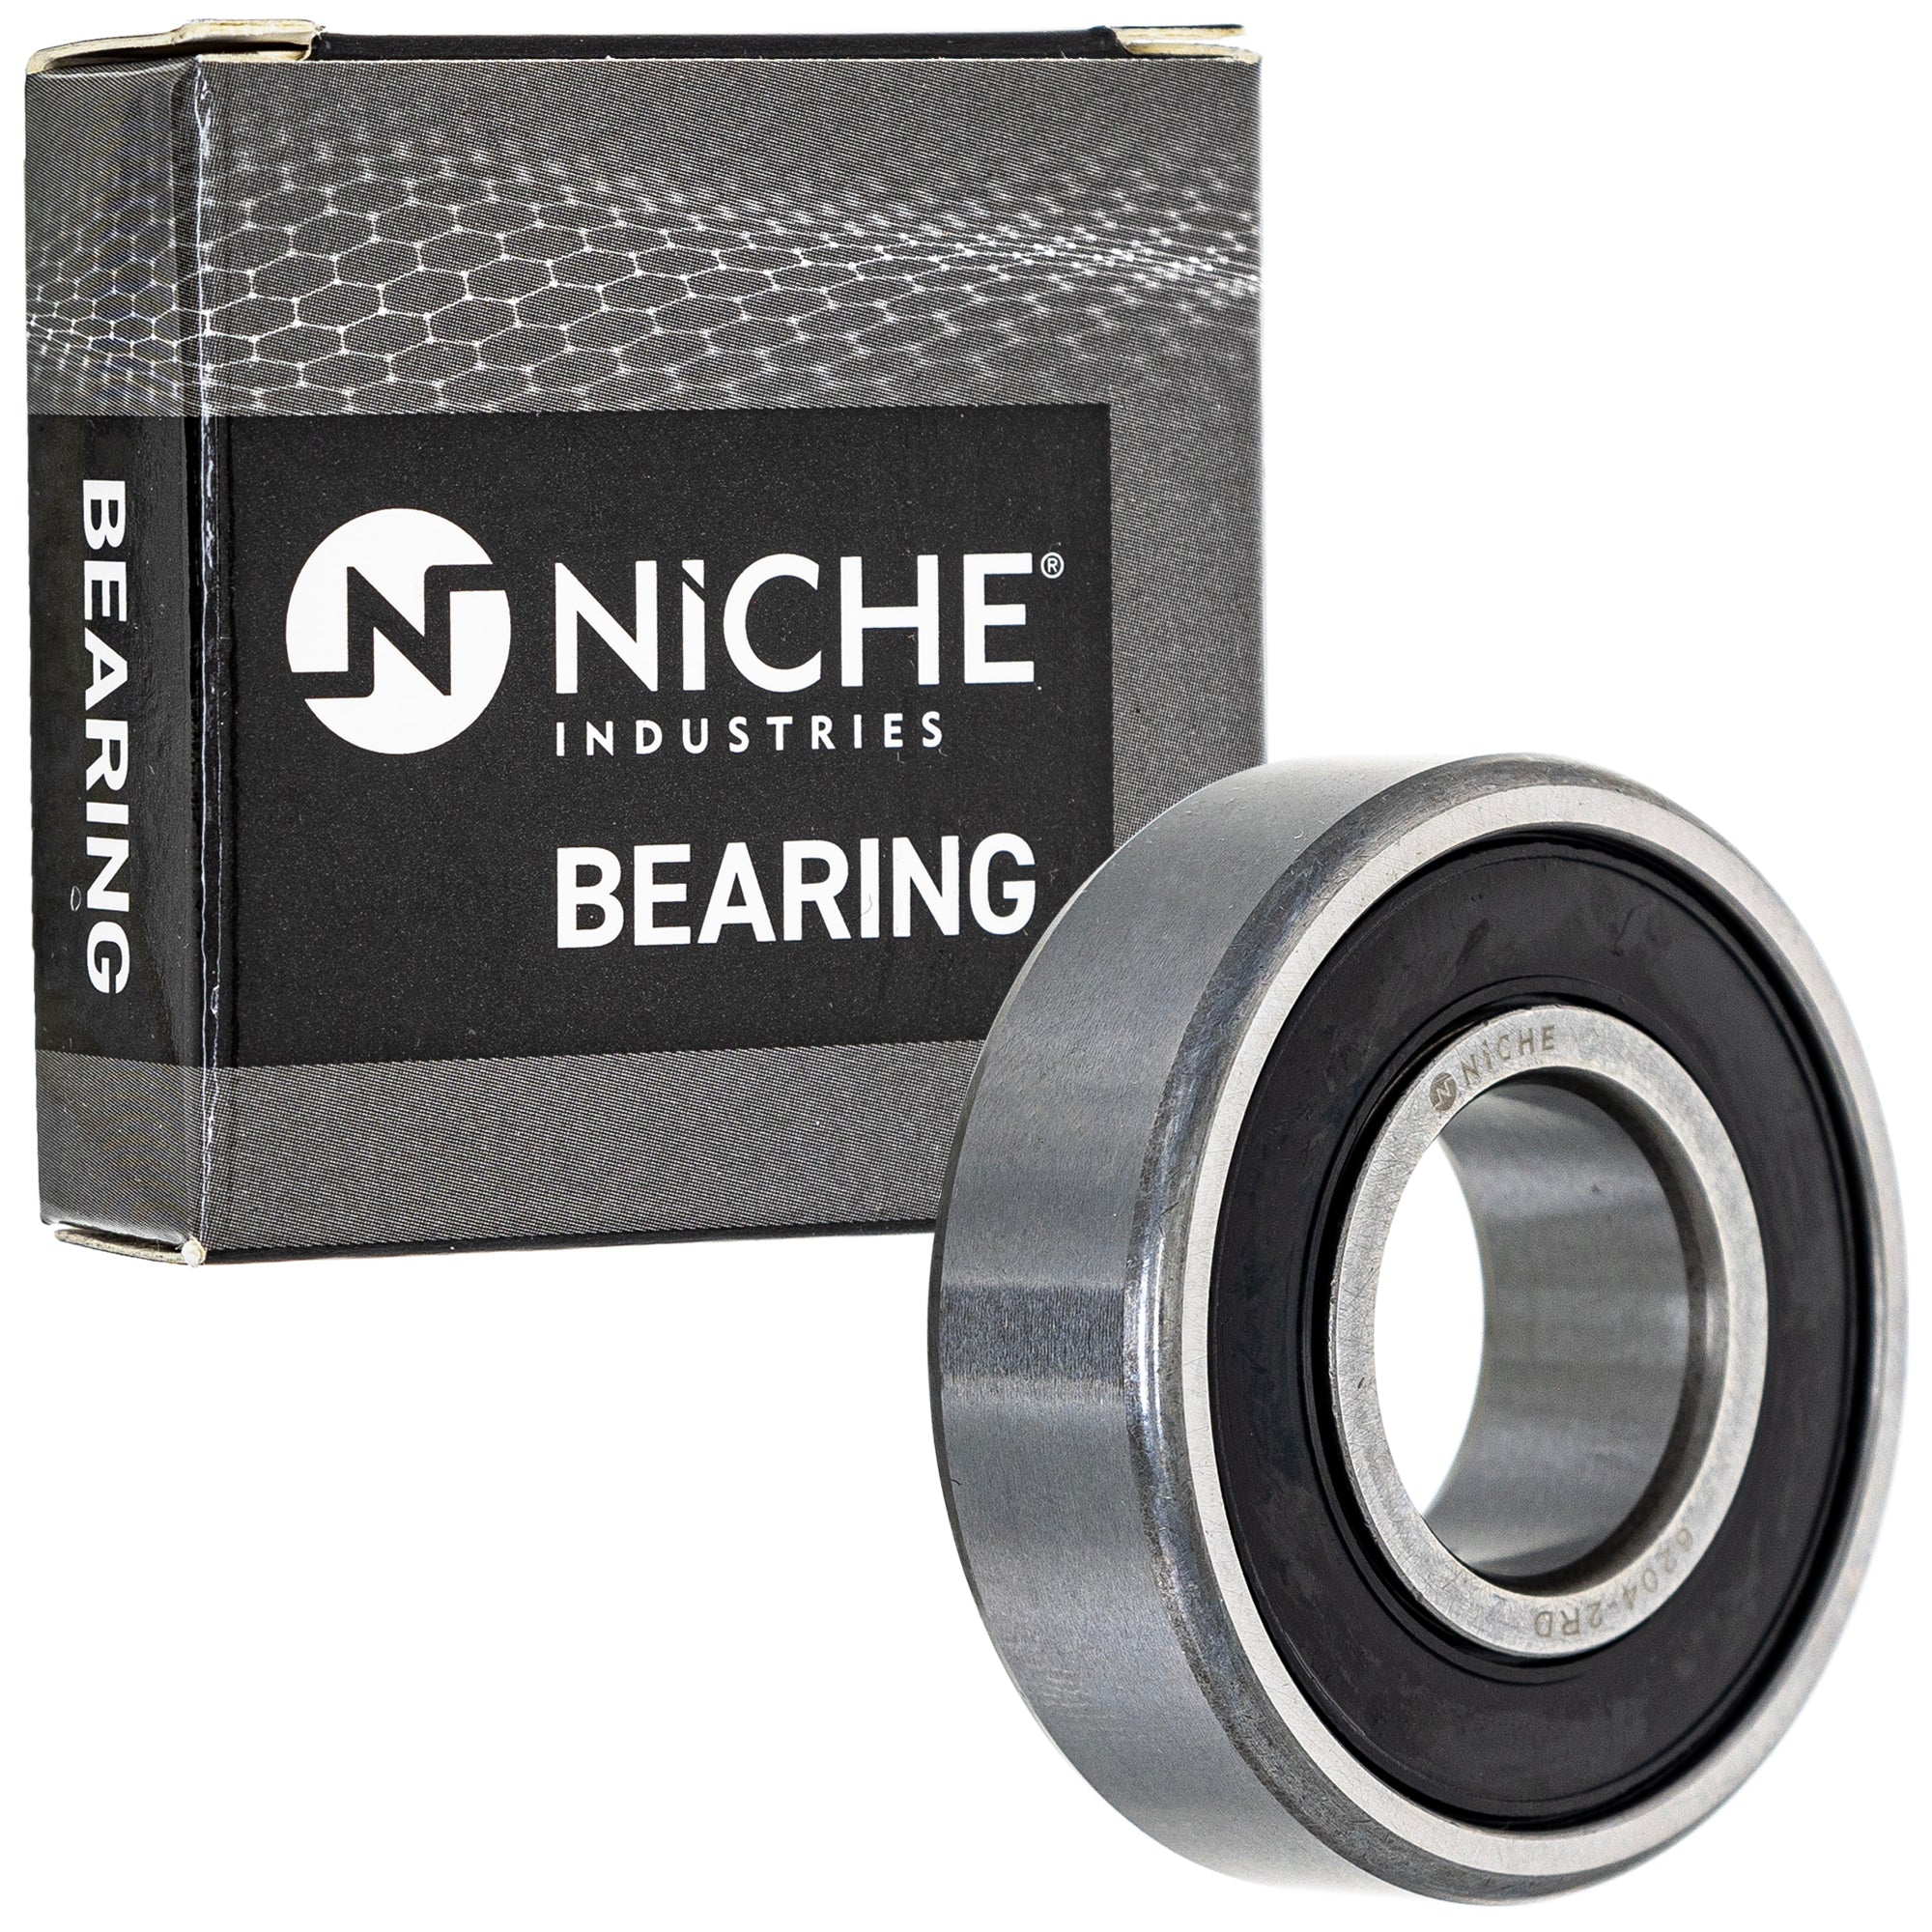 NICHE 519-CBB2212R Bearing 10-Pack for zOTHER Snapper MURRAY Murray